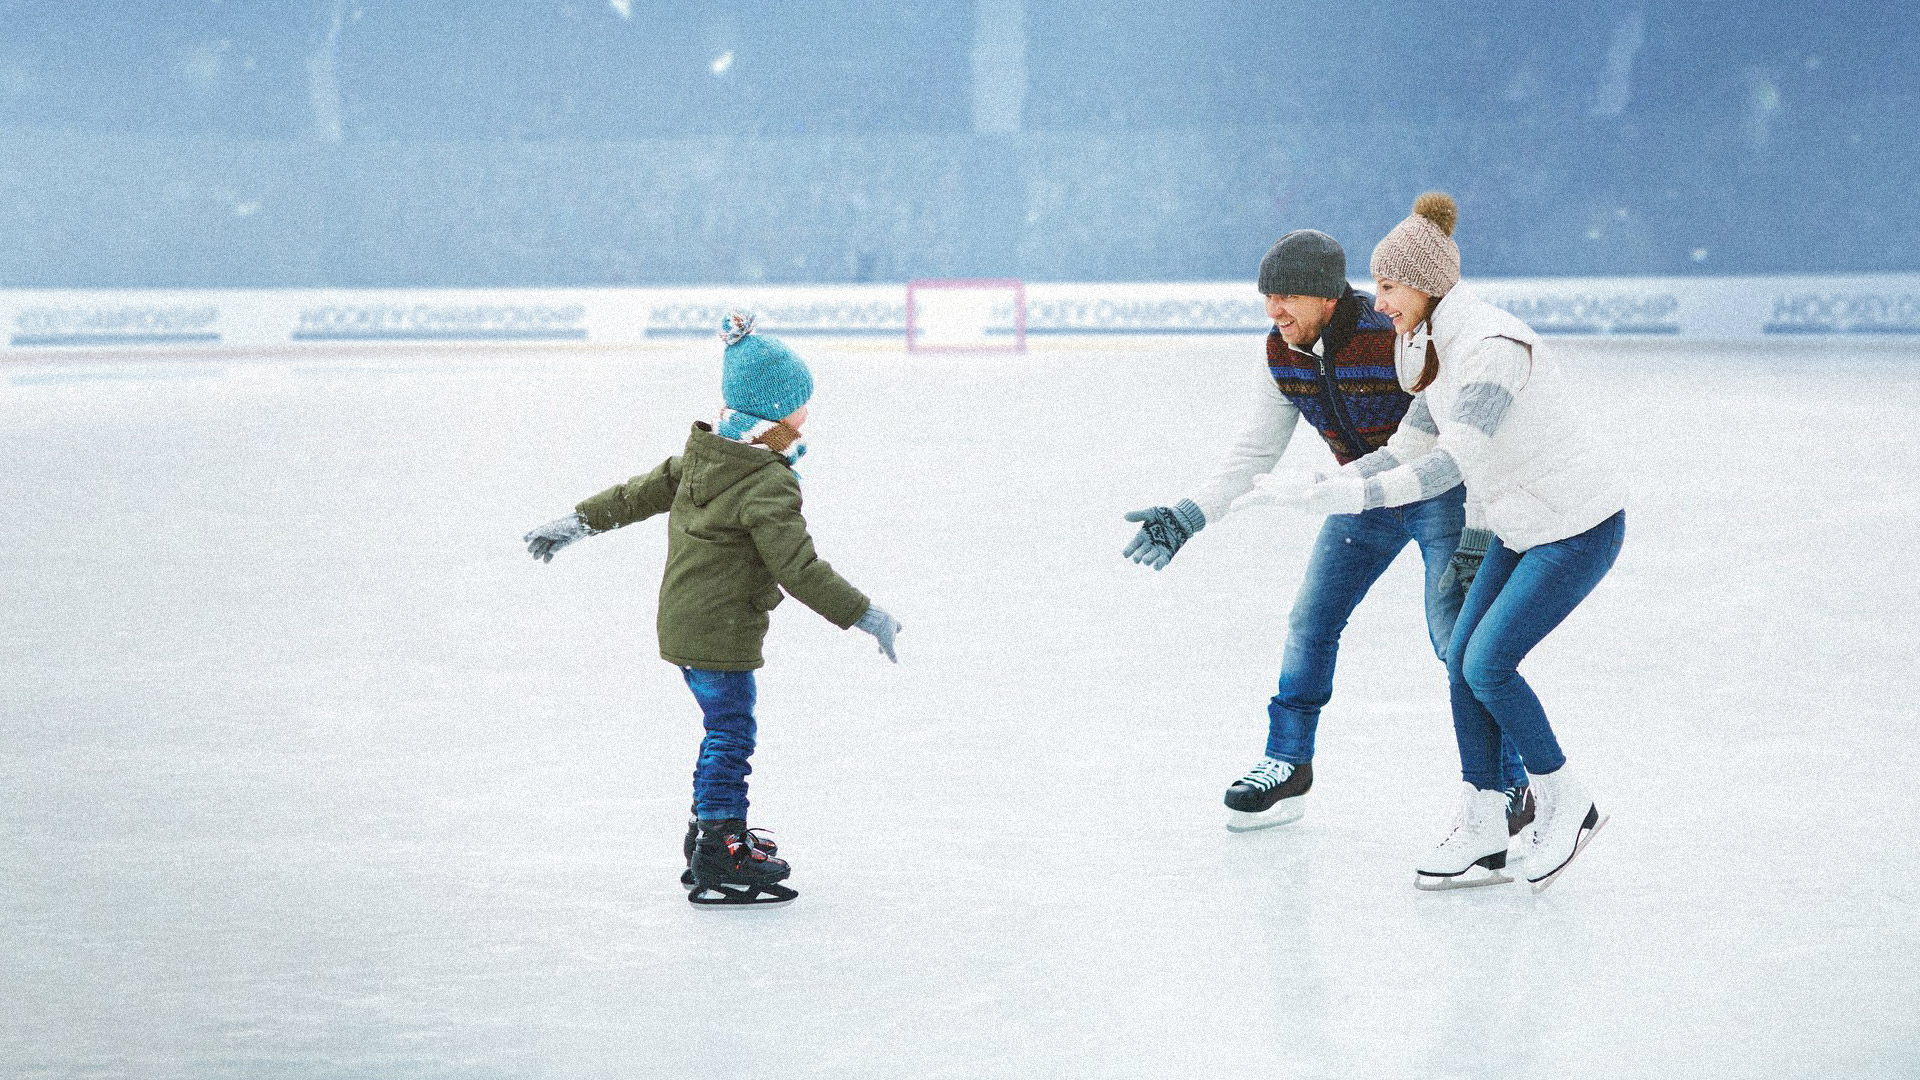 Skating sessions / Try the new skating rink of Kaunas Ice Palace!